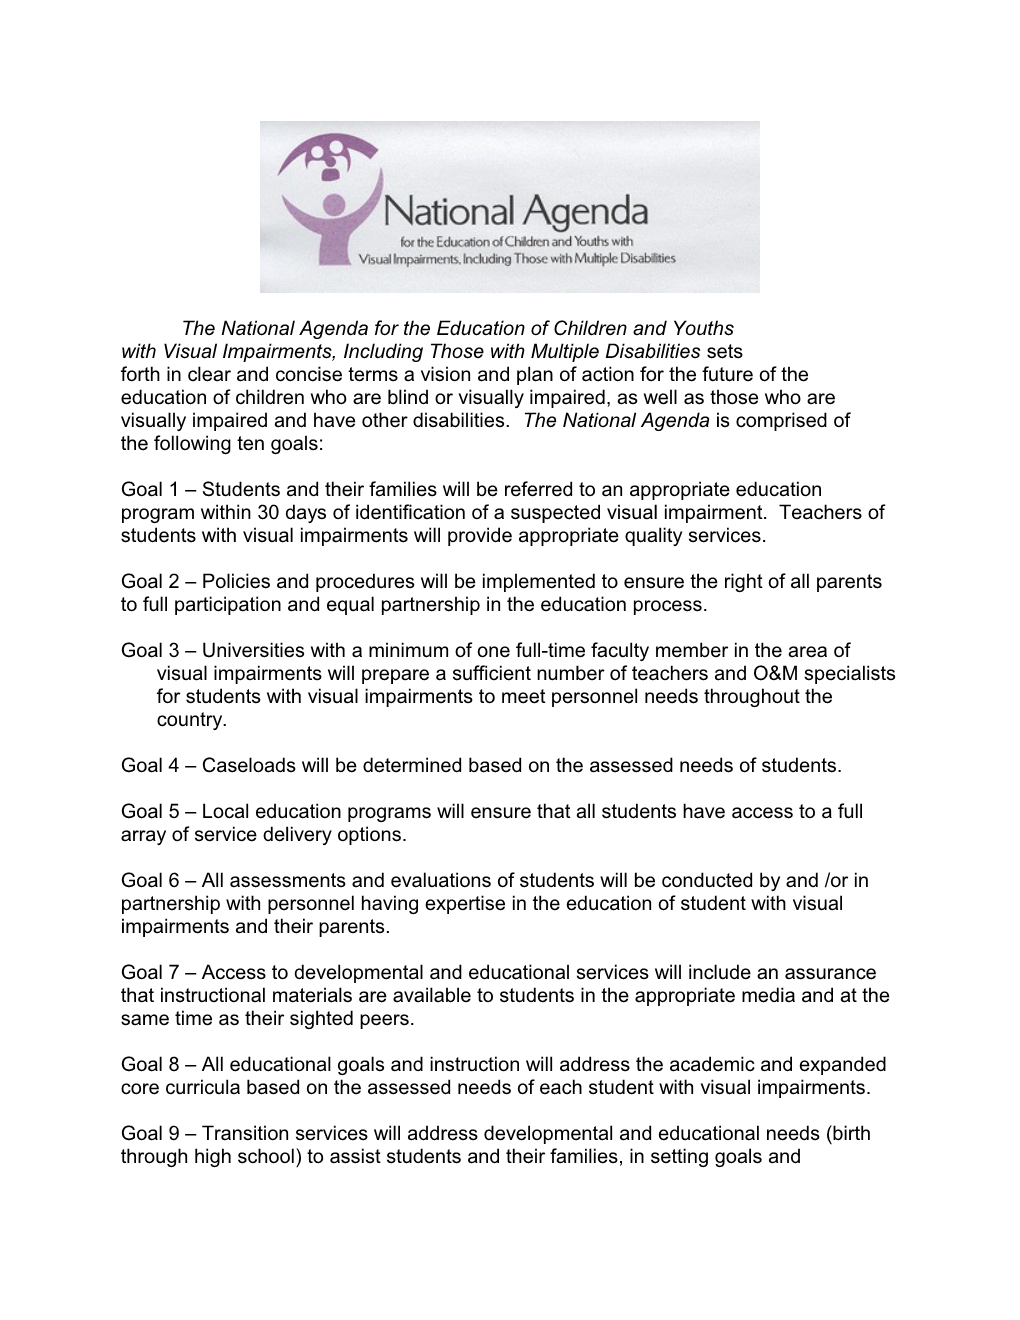 The National Agenda for the Education of Children and Youths